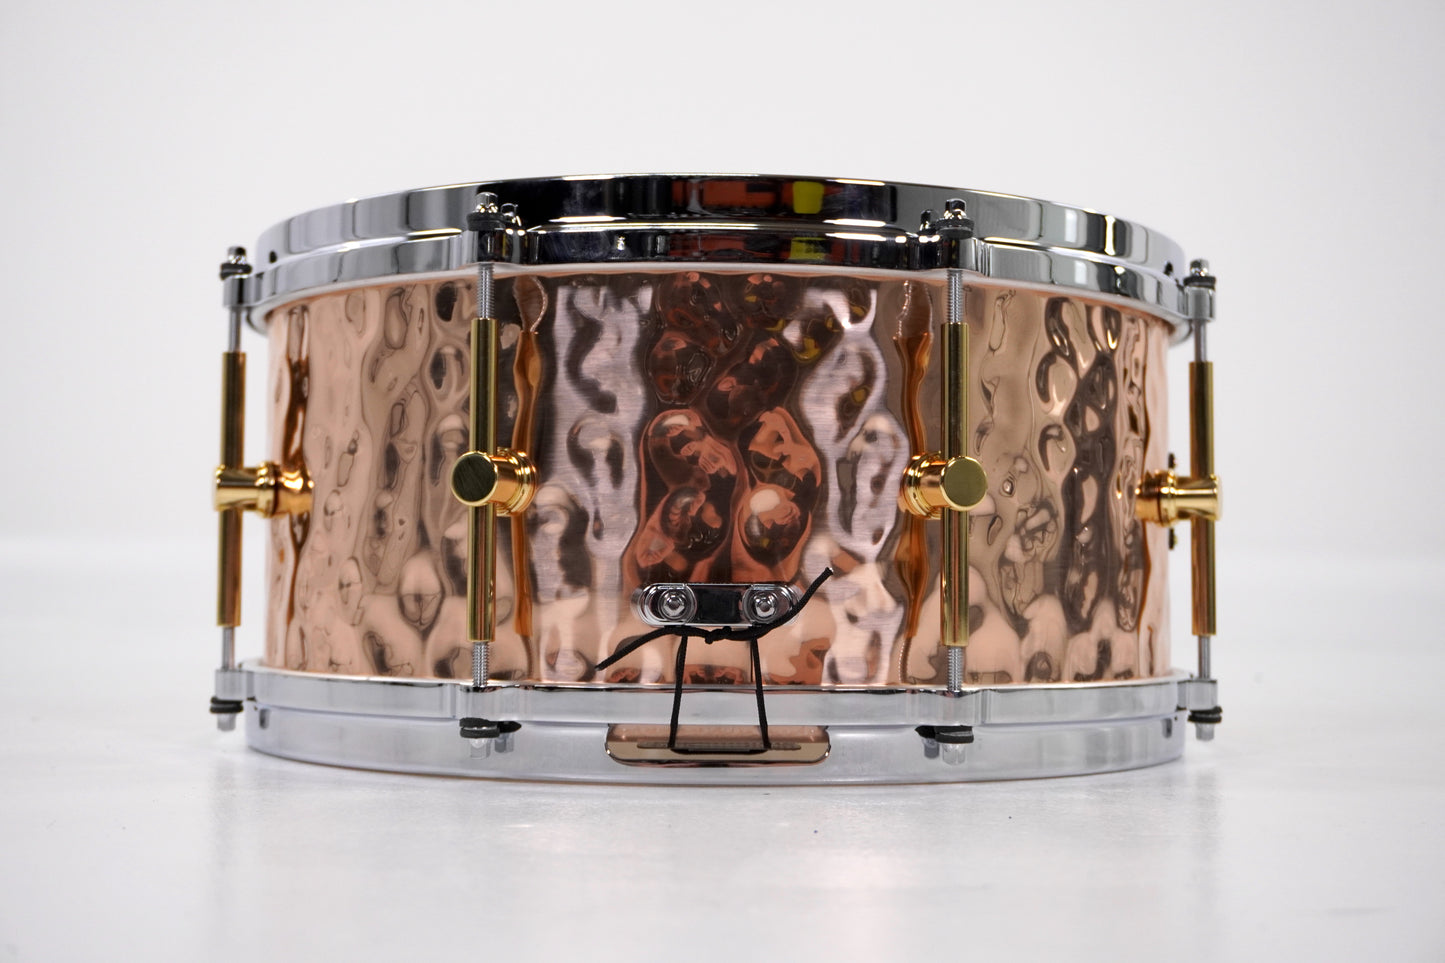 Canopus 14 x 6.5 Hammered Bronze Snare